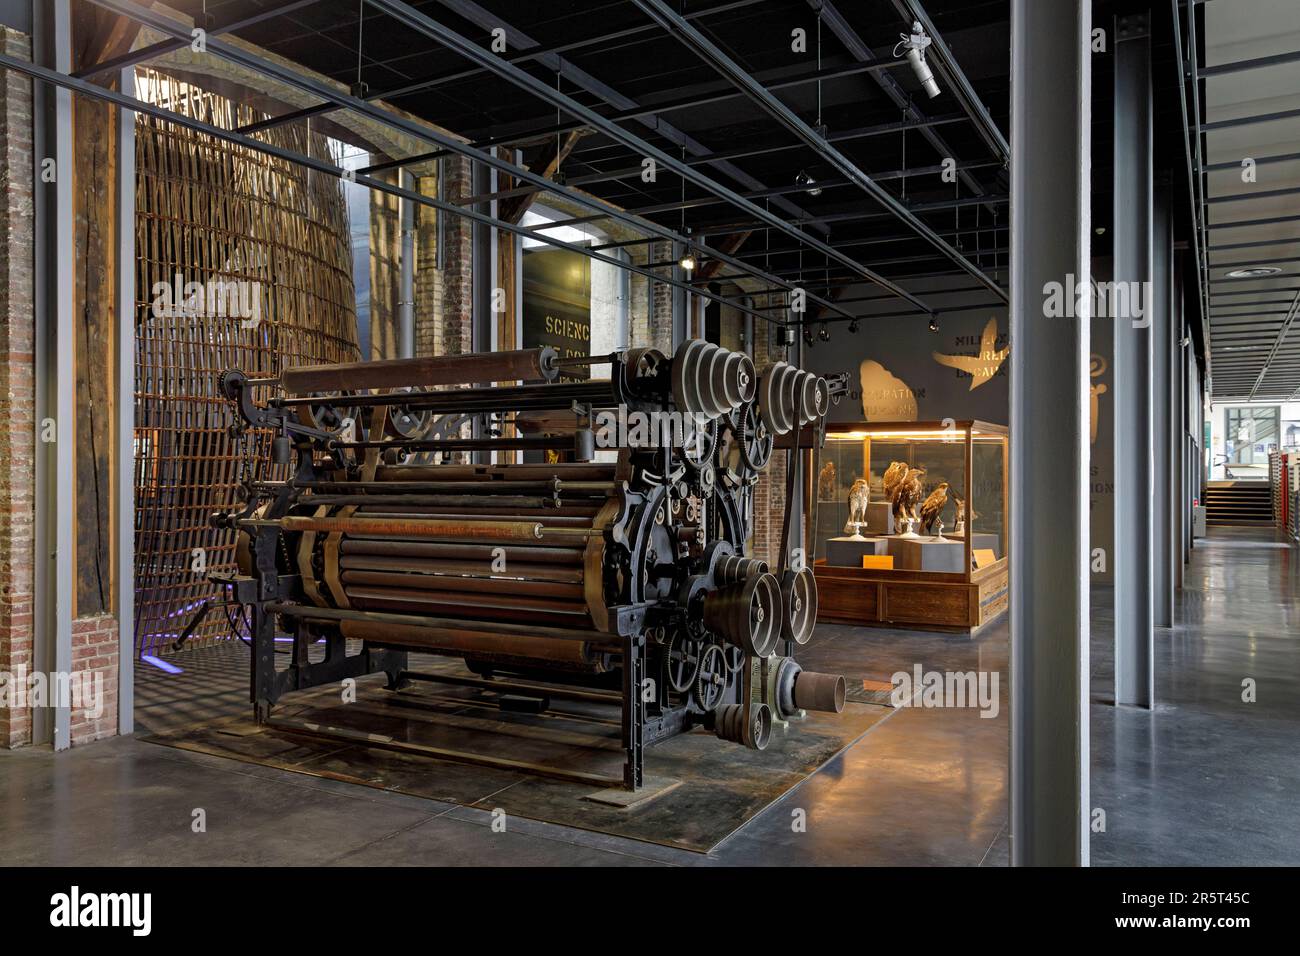 France, Seine-Maritime, Elbeuf-sur-Seine, designated as French Towns and Lands of Art and History, interior of the Fabrique des Savoirs (Knowledge Factory), former Blin et Blin weaving factory transformed into a museum and Architectural and Heritage Interpretation Centre Stock Photo